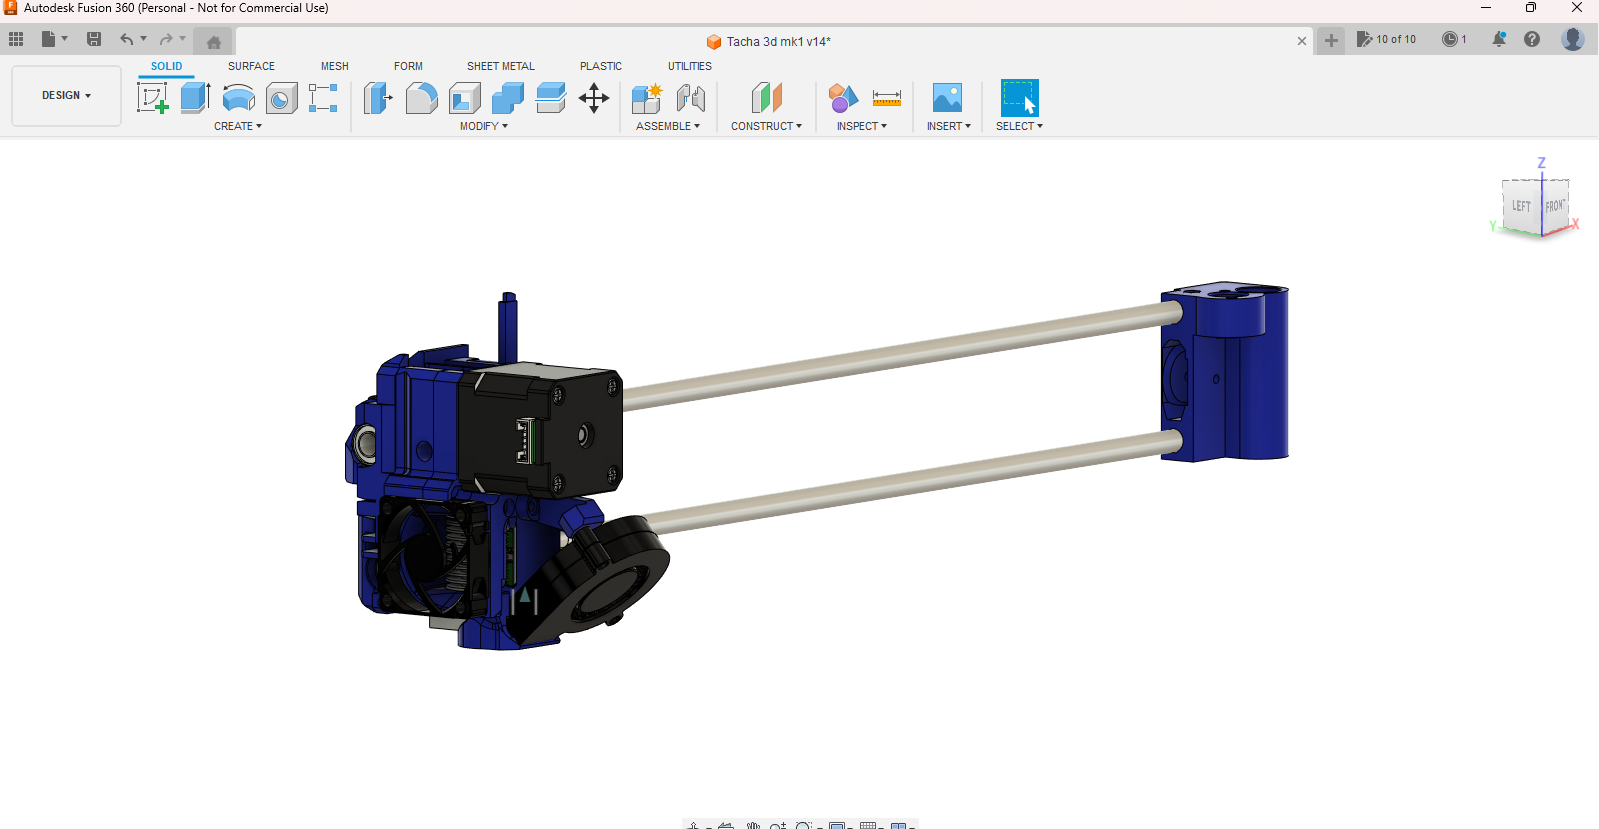 Autodesk Fusion 360 (Personal - Not for Commercial Use) 6_30_2023 9_04_07 PM.png